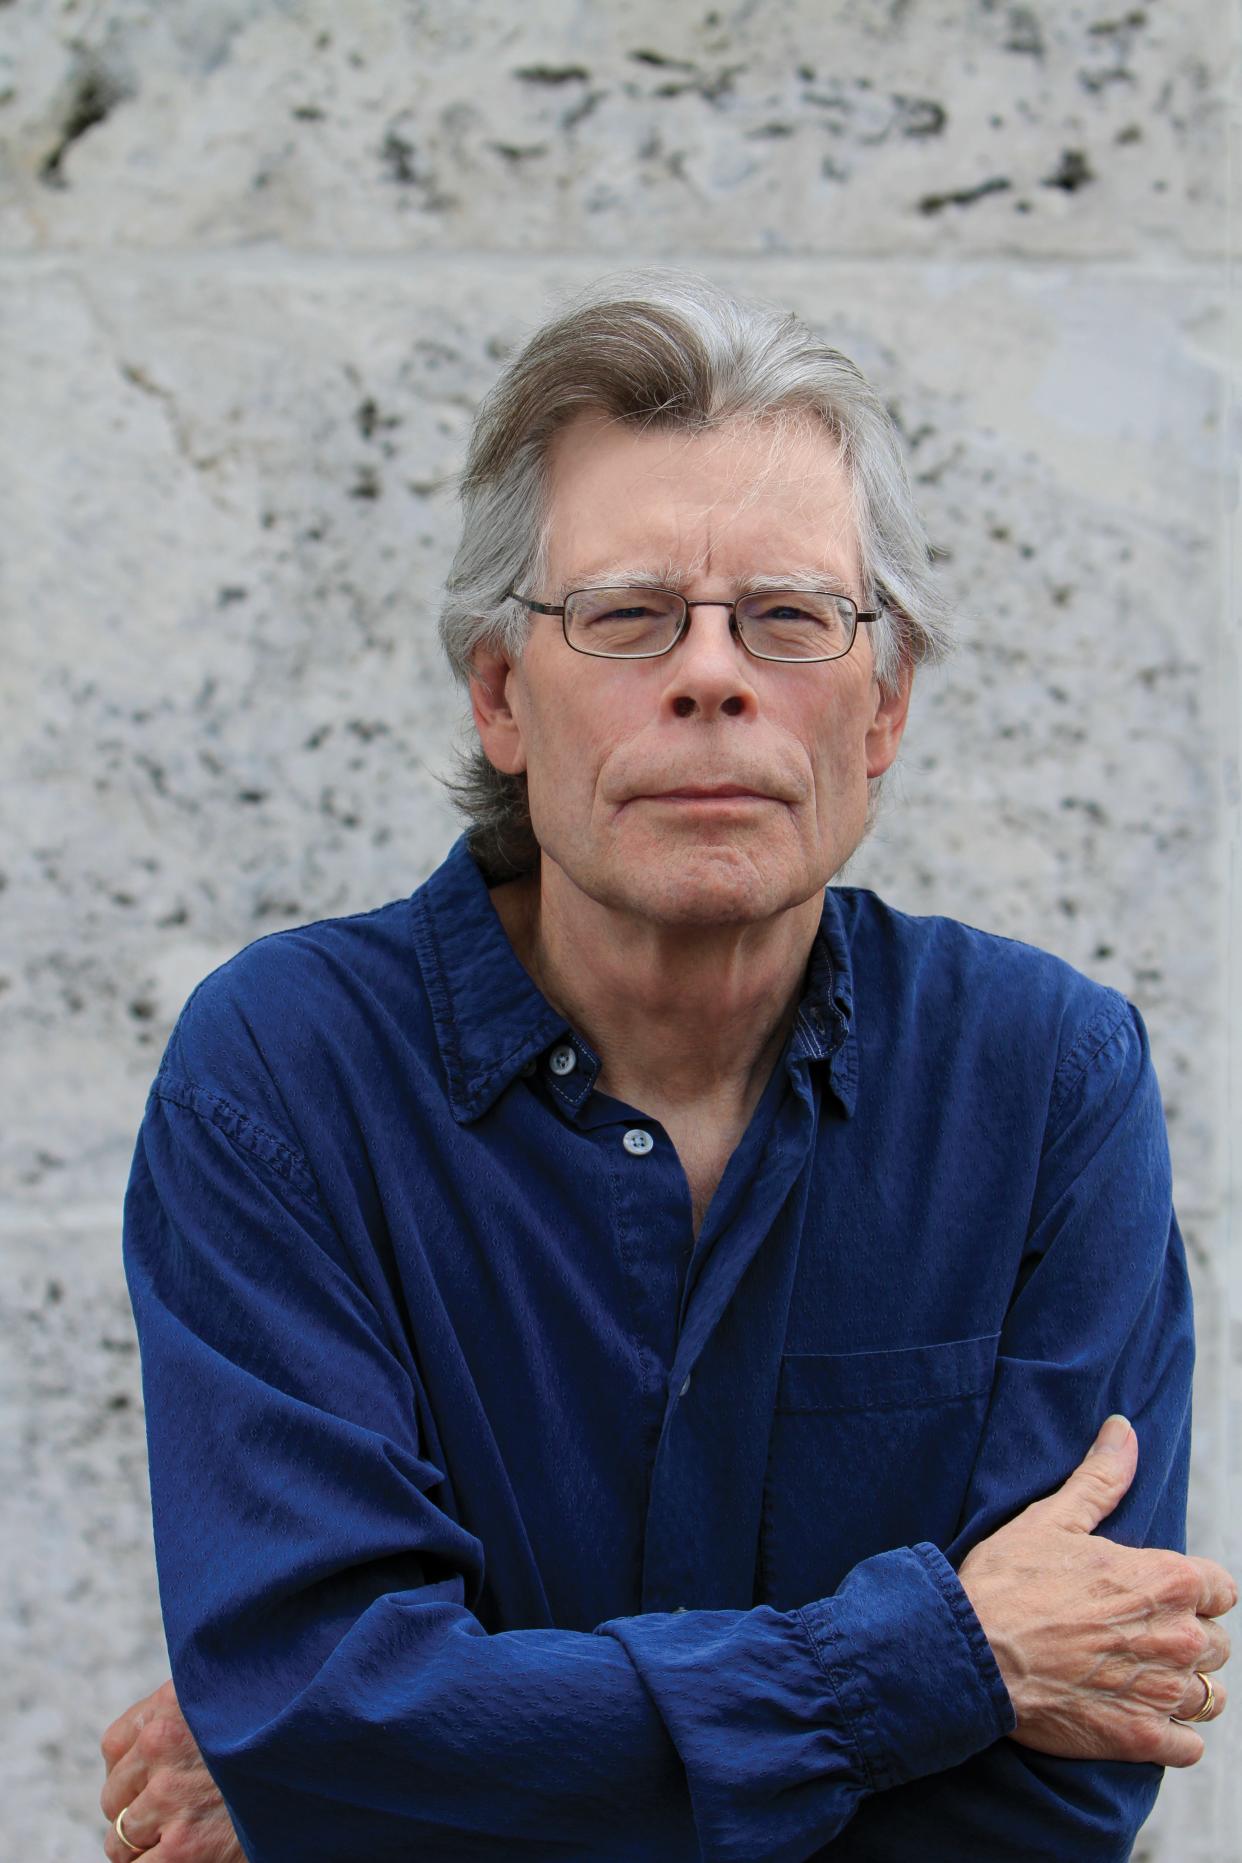 Stephen King follows up last year's hard-boiled crime novel "Billy Summers" with the coming-of-age "Fairy Tale."